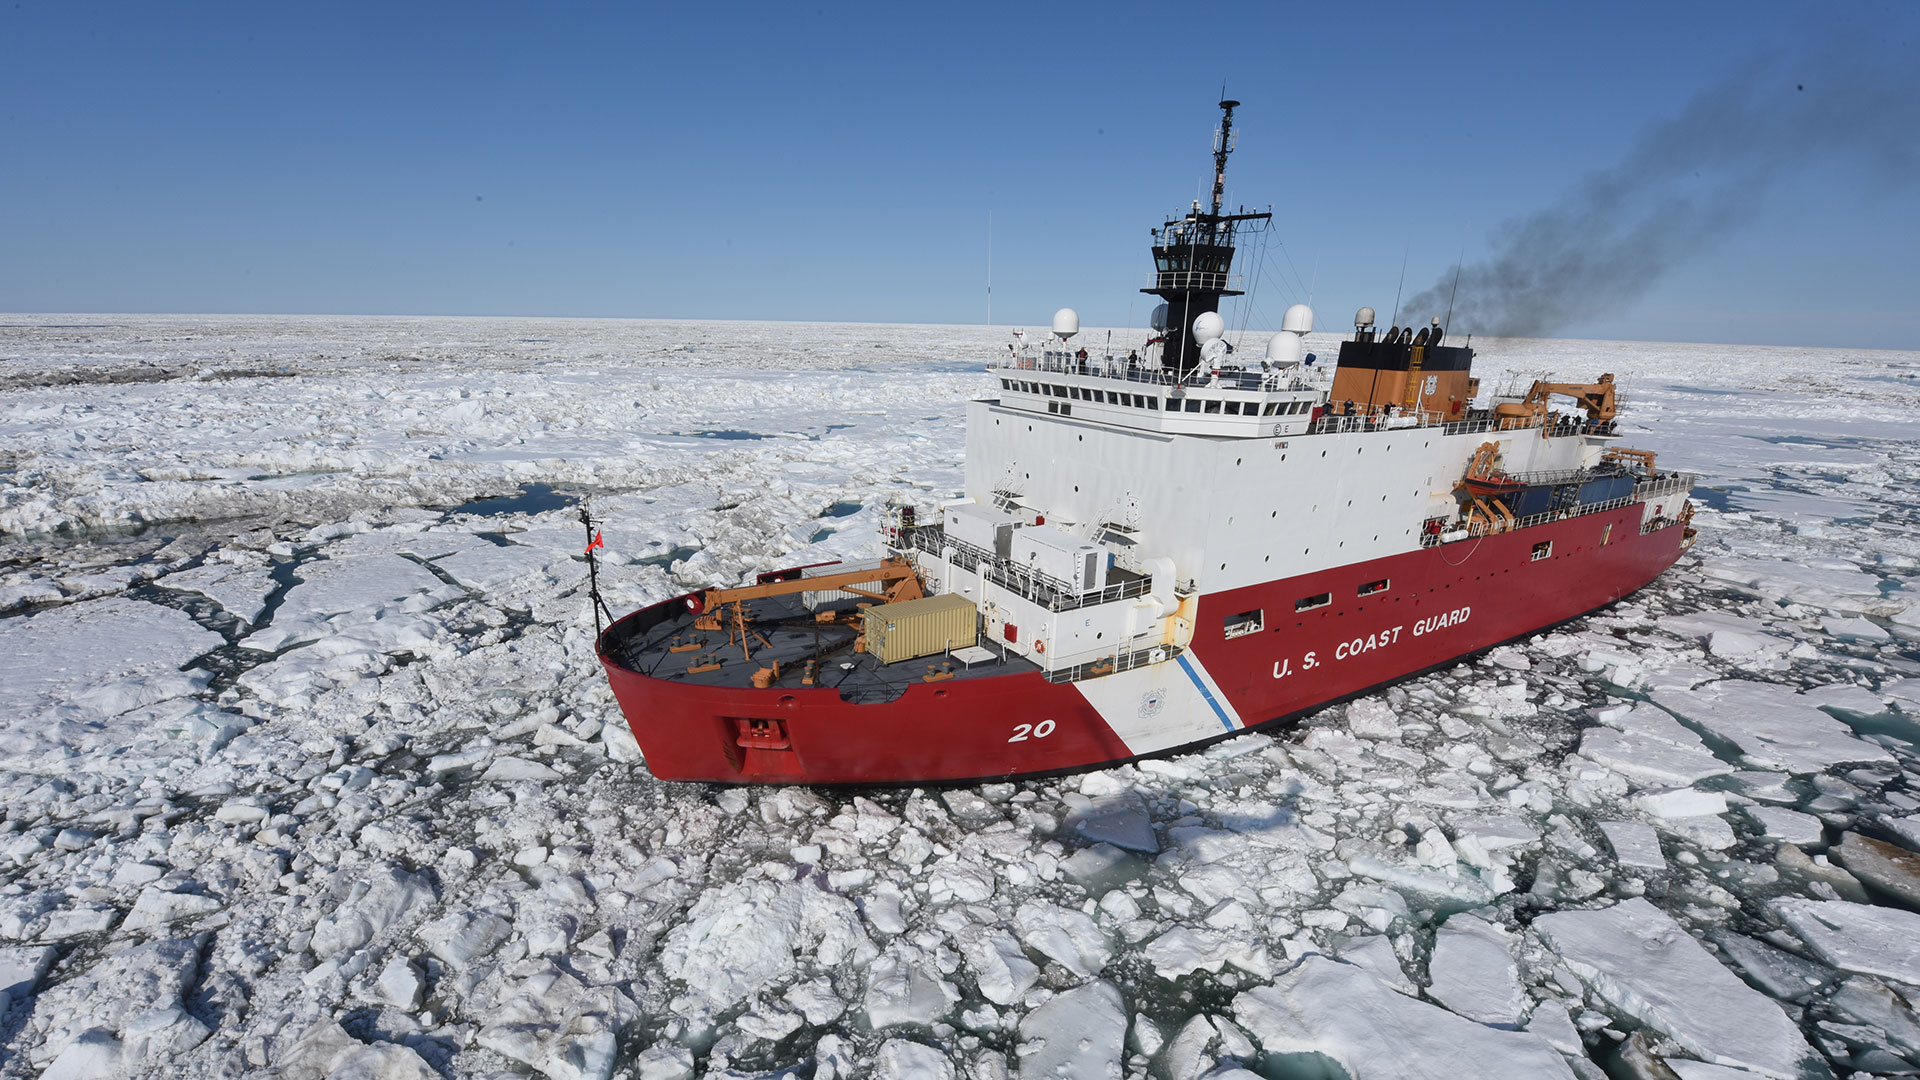 The Coast Guard Cutter Healy patrols the Arctic Ocean in July 2015. Photo: Petty Officer 2nd Class Grant DeVuyst